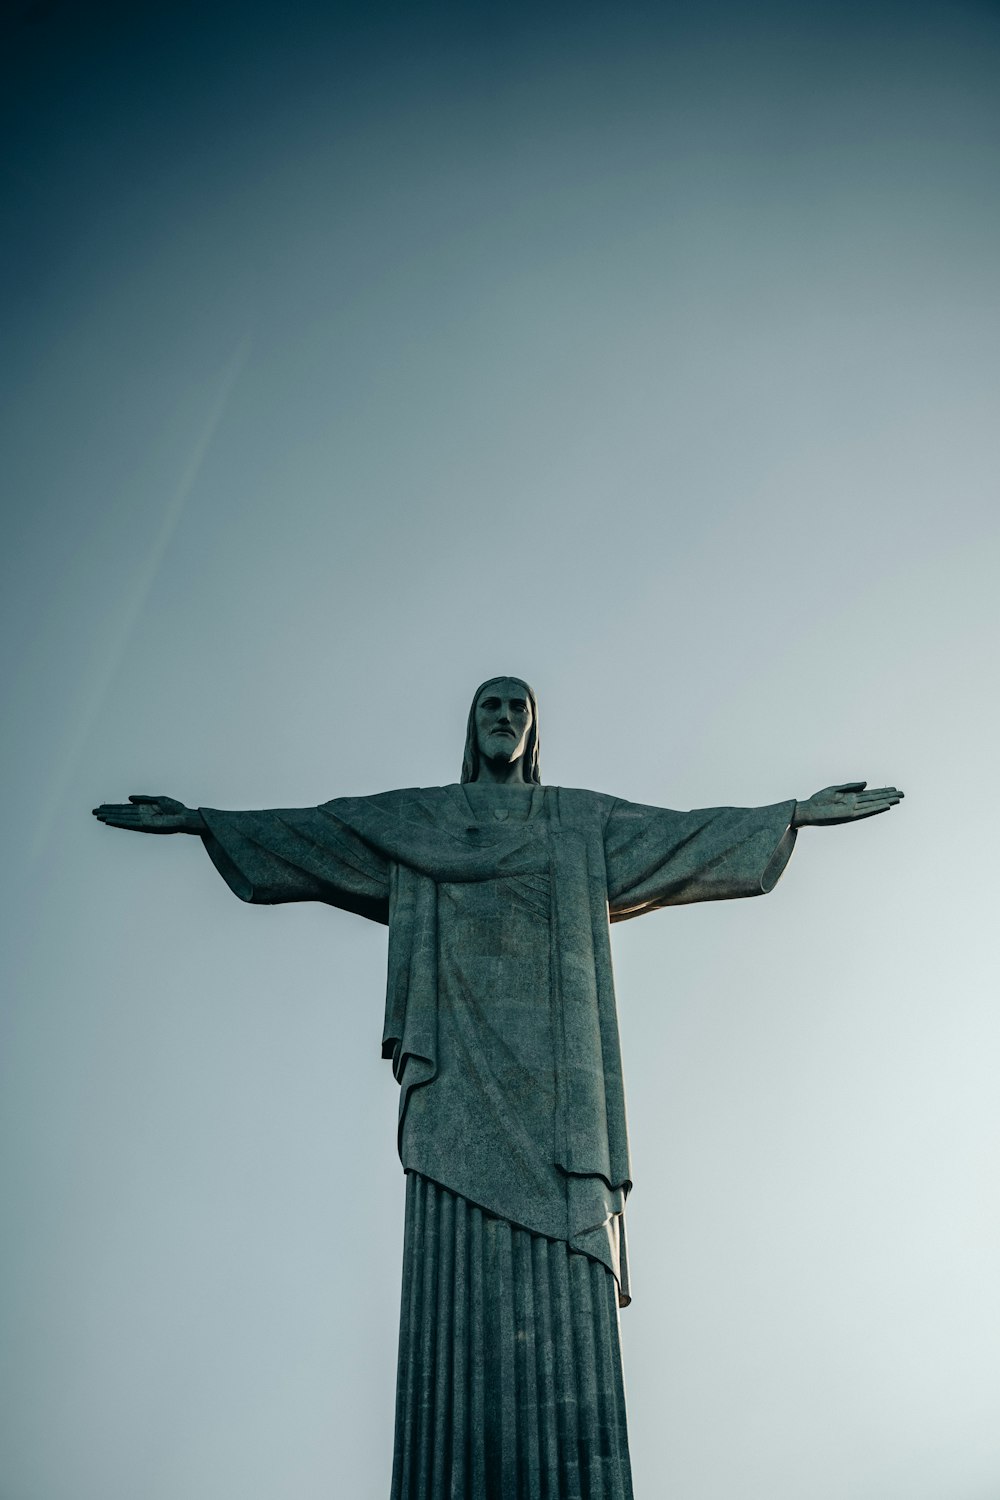 a large statue of christ in the middle of a field